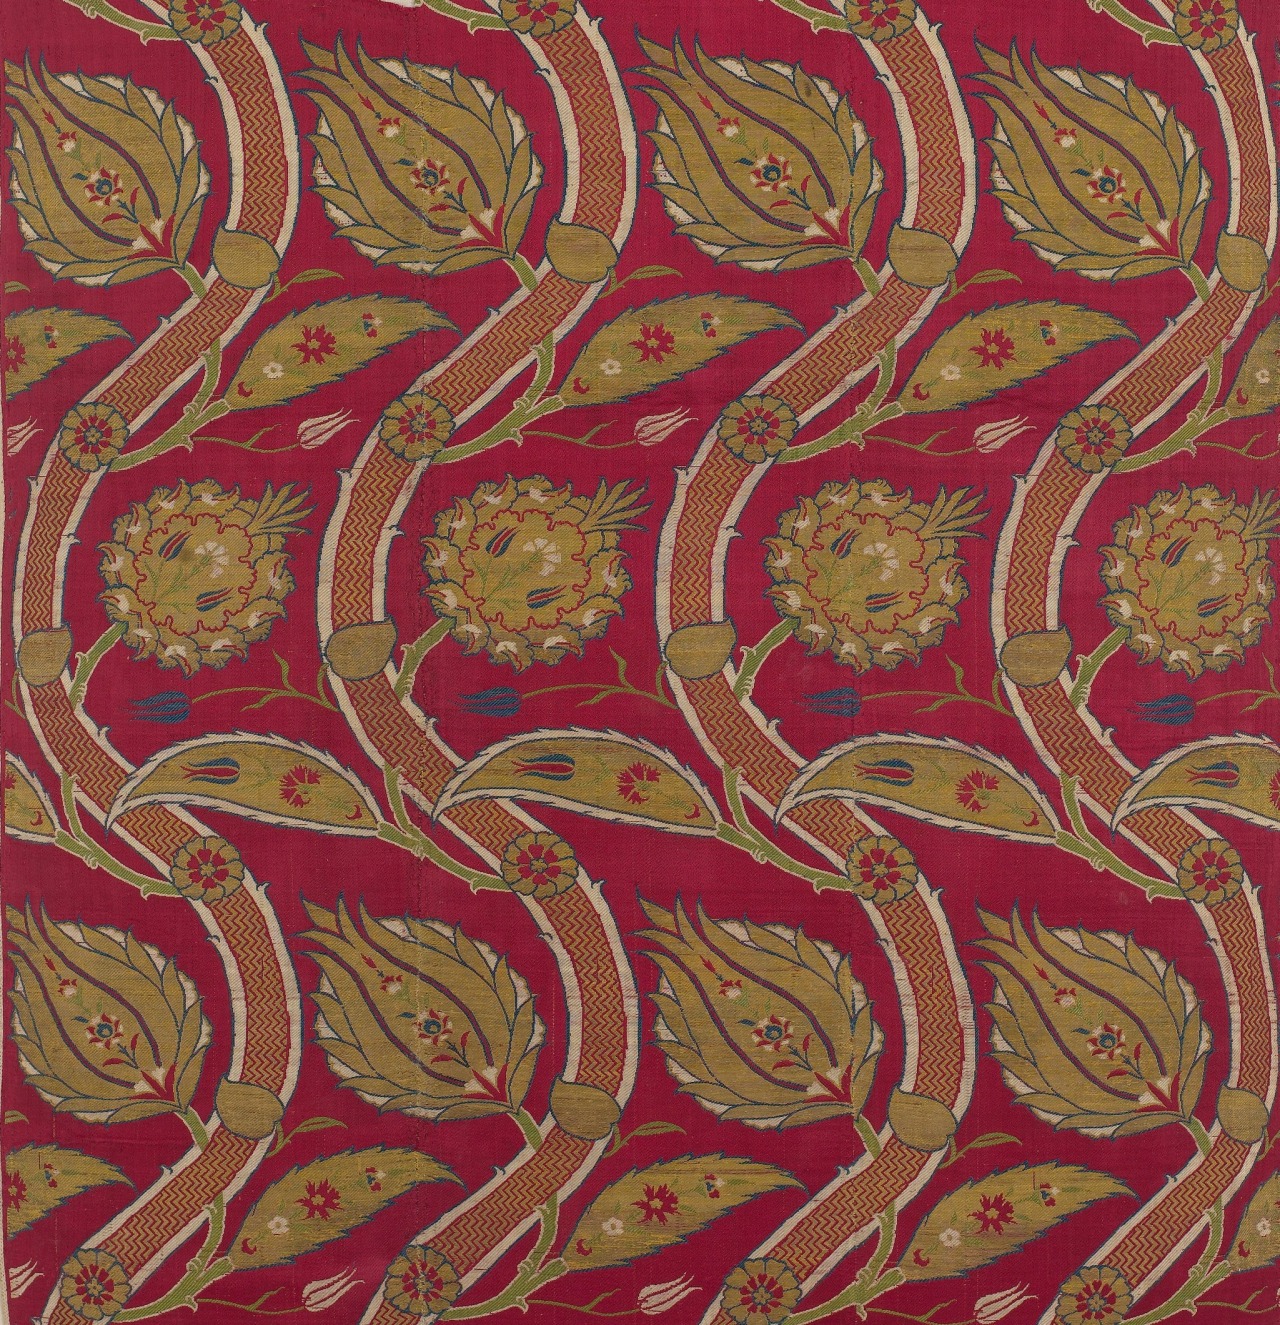 Silk textile with metal-wrapped gold thread, Ottoman Istanbul, ca. 1565–80Source: Met Museum